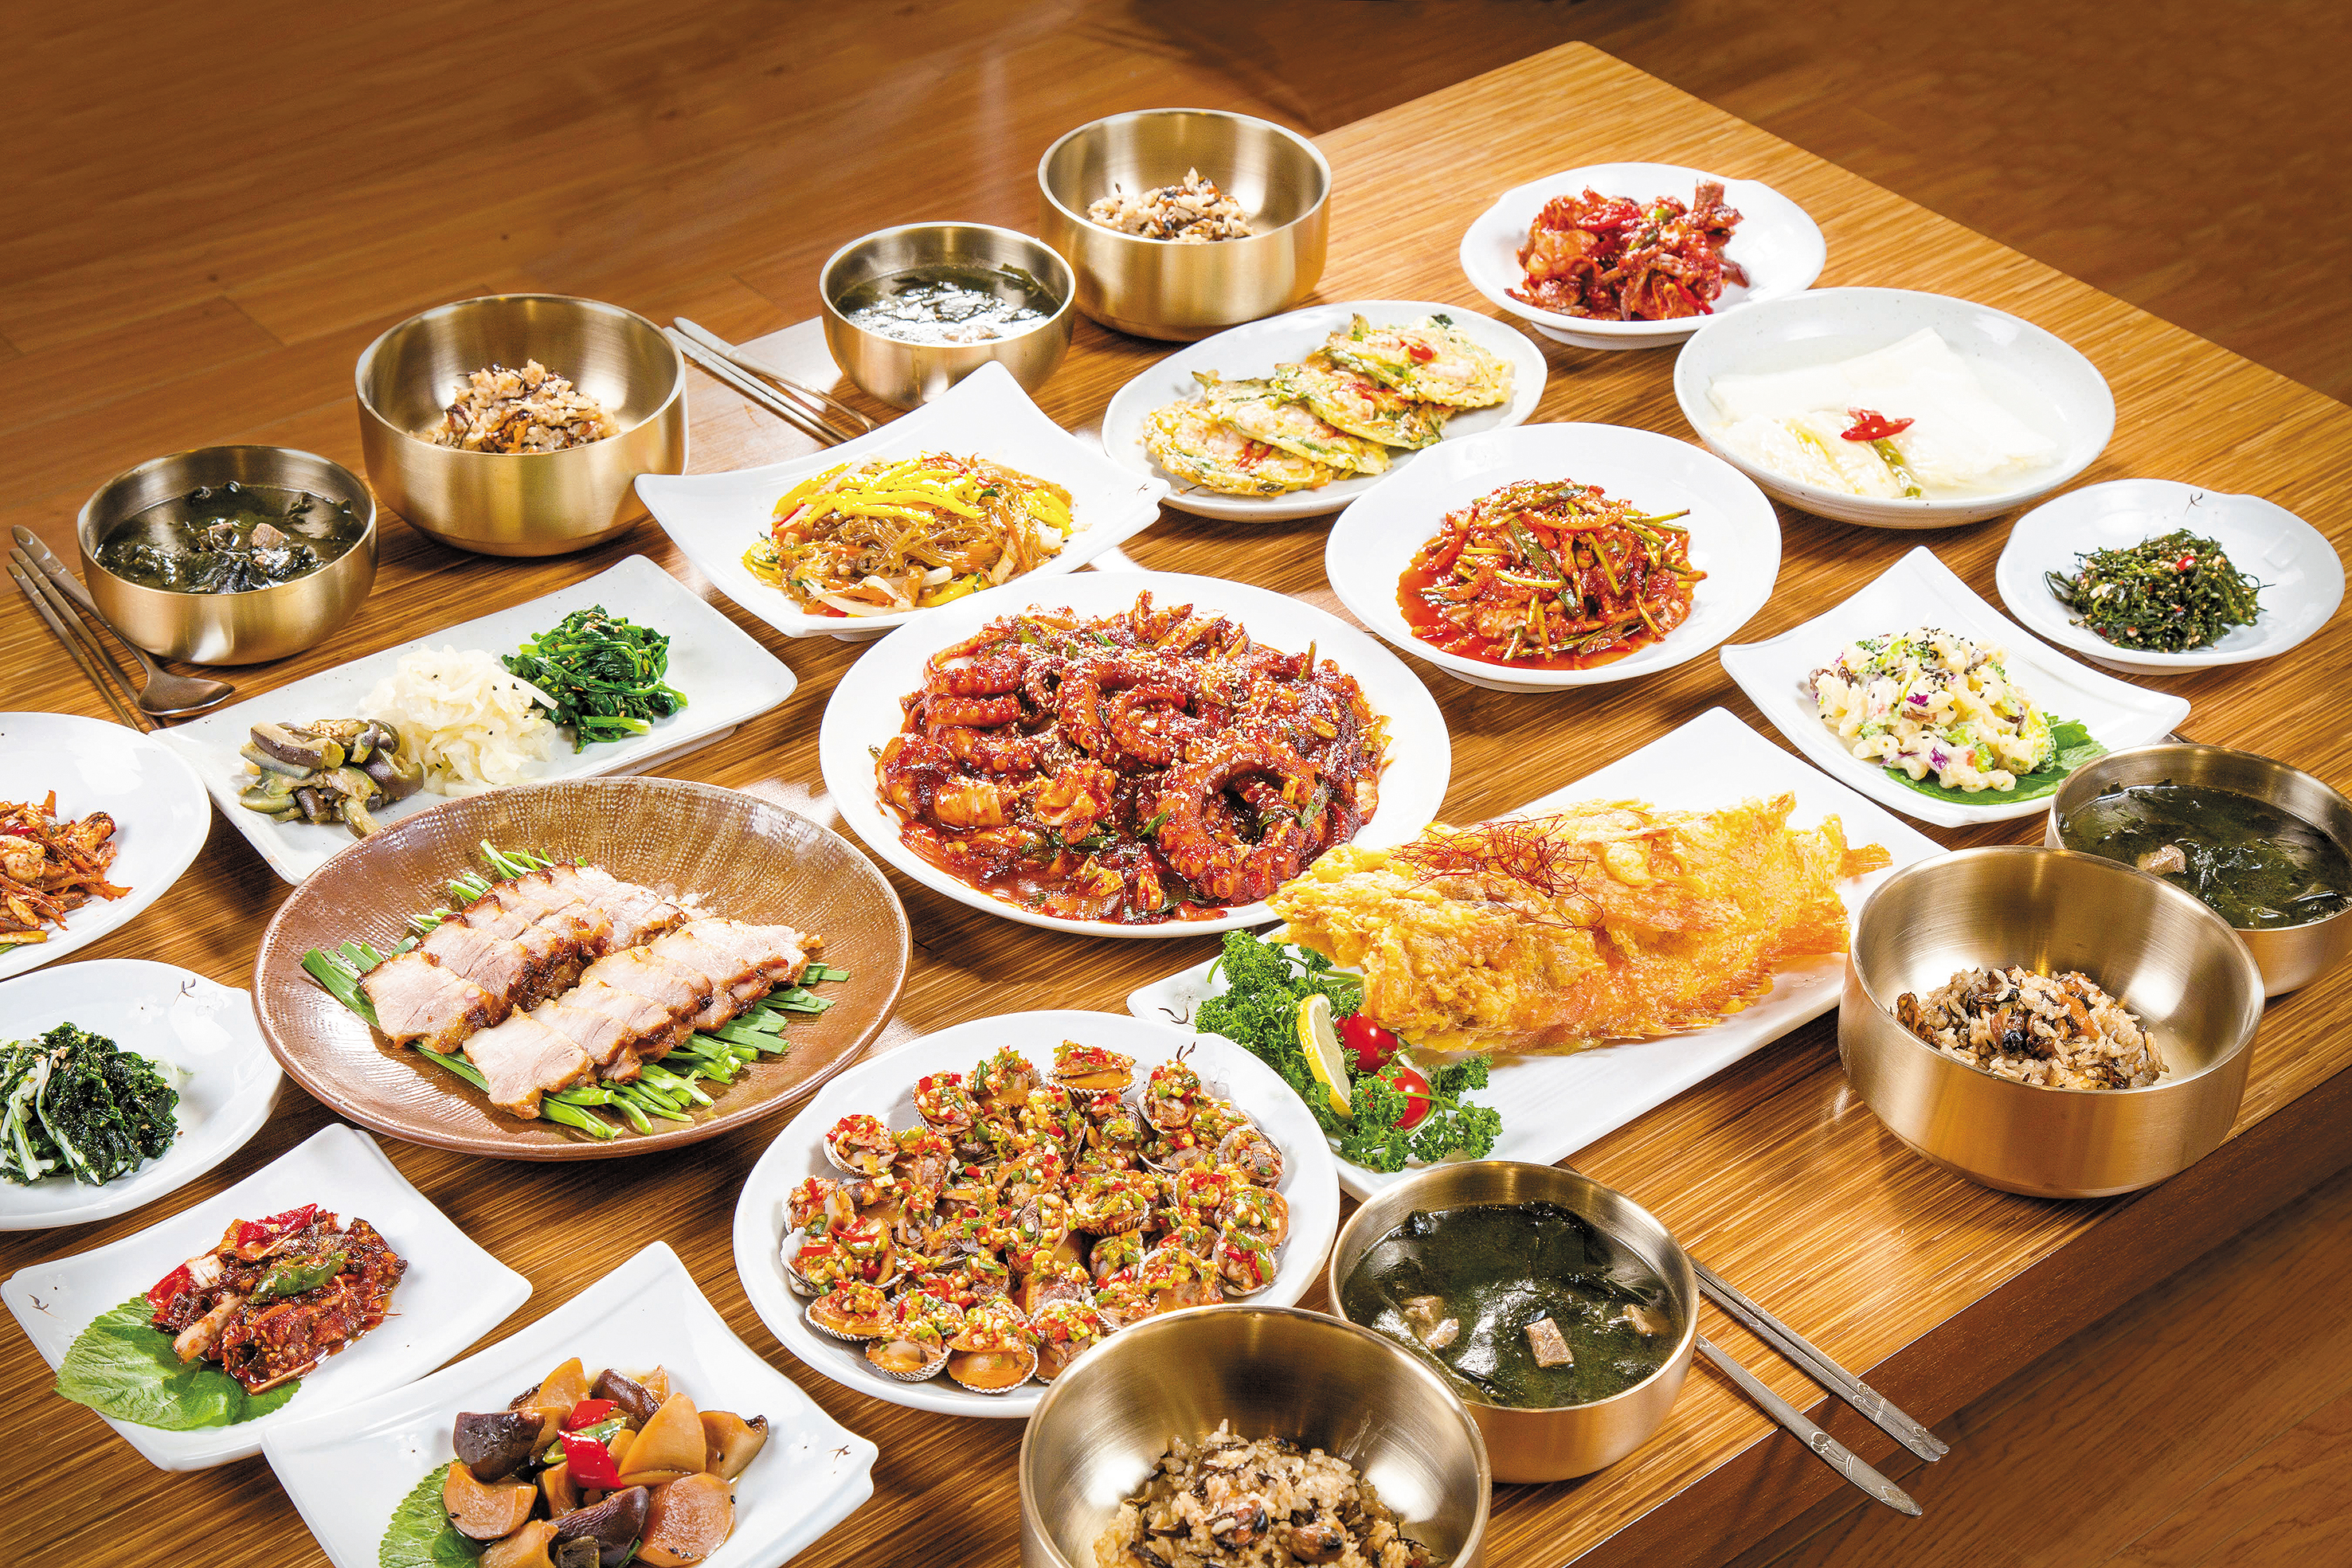 Busan gourmet tour with history and diversity